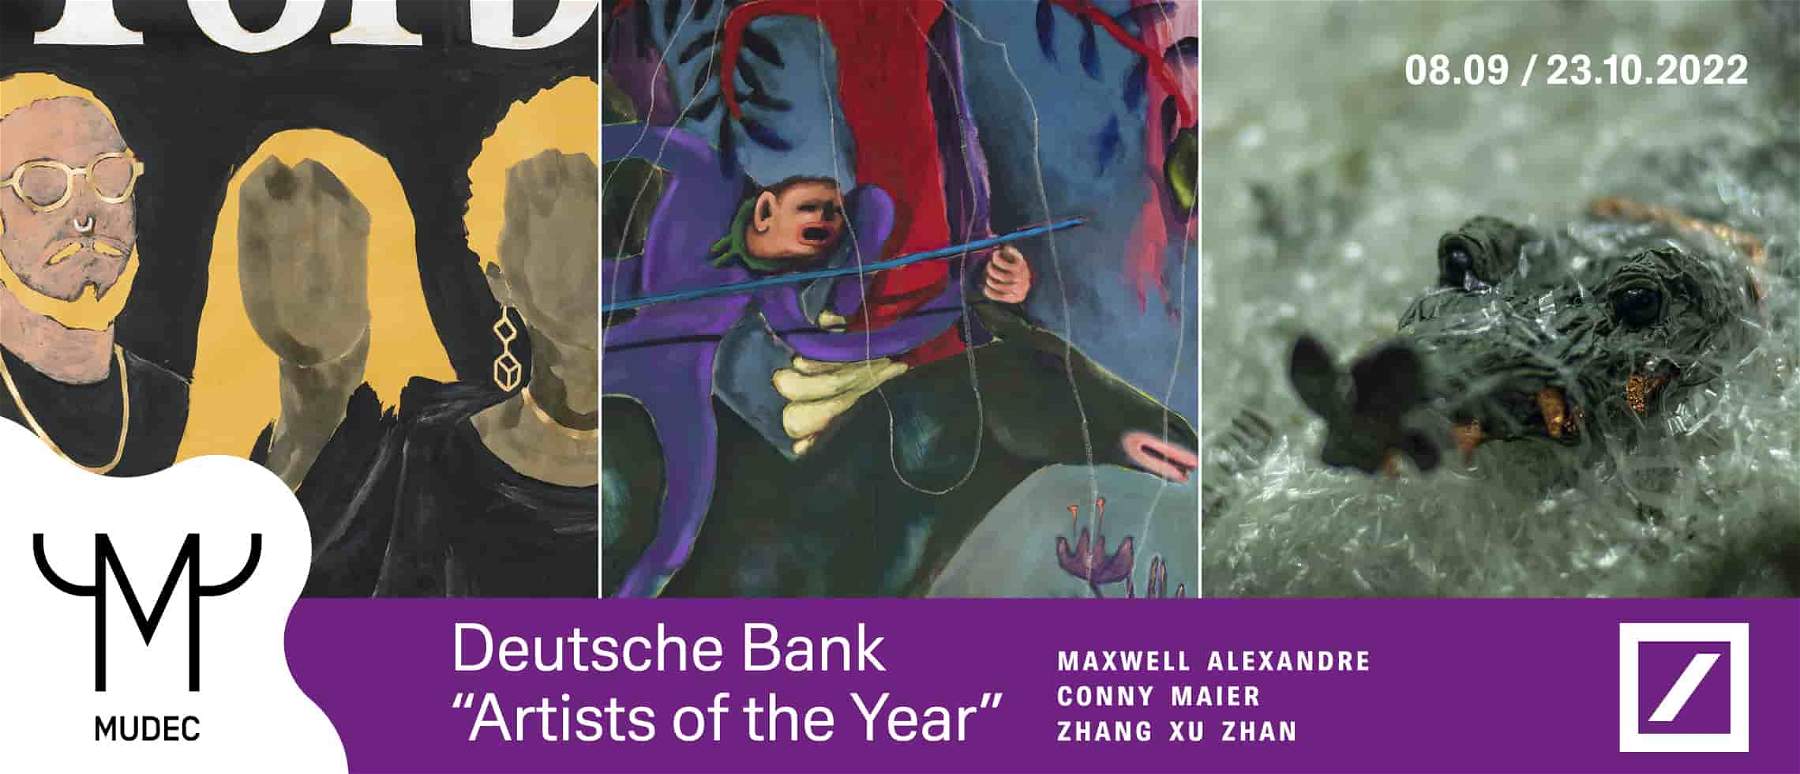 Deutsche Bank's Artists of the Year 2021 winners on display at MUDEC